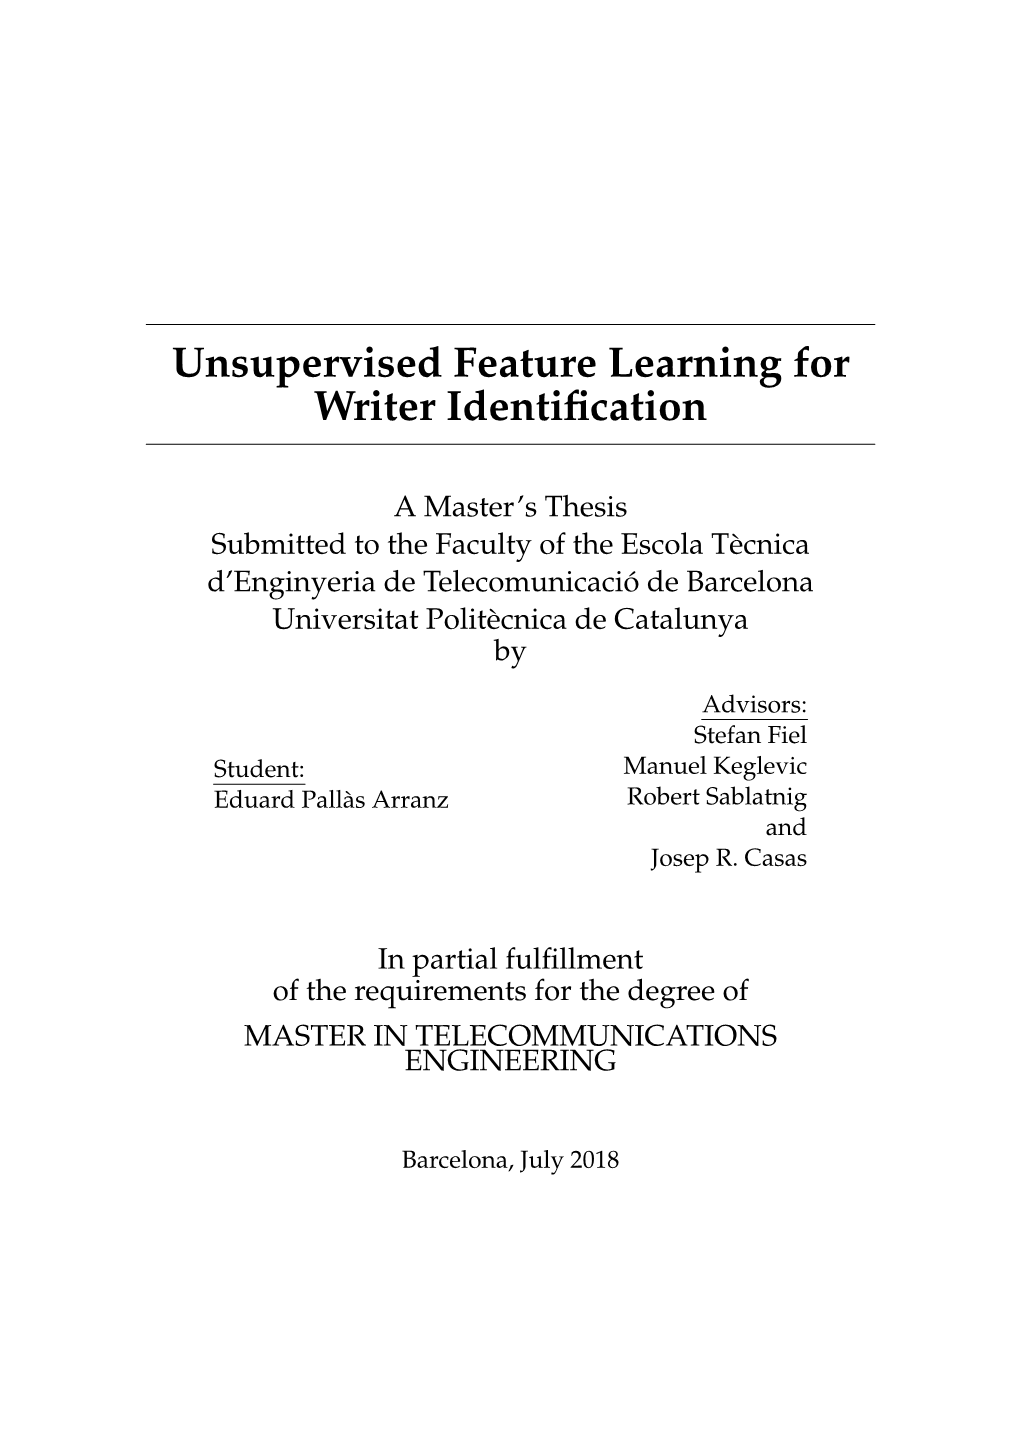 Unsupervised Feature Learning for Writer Identification